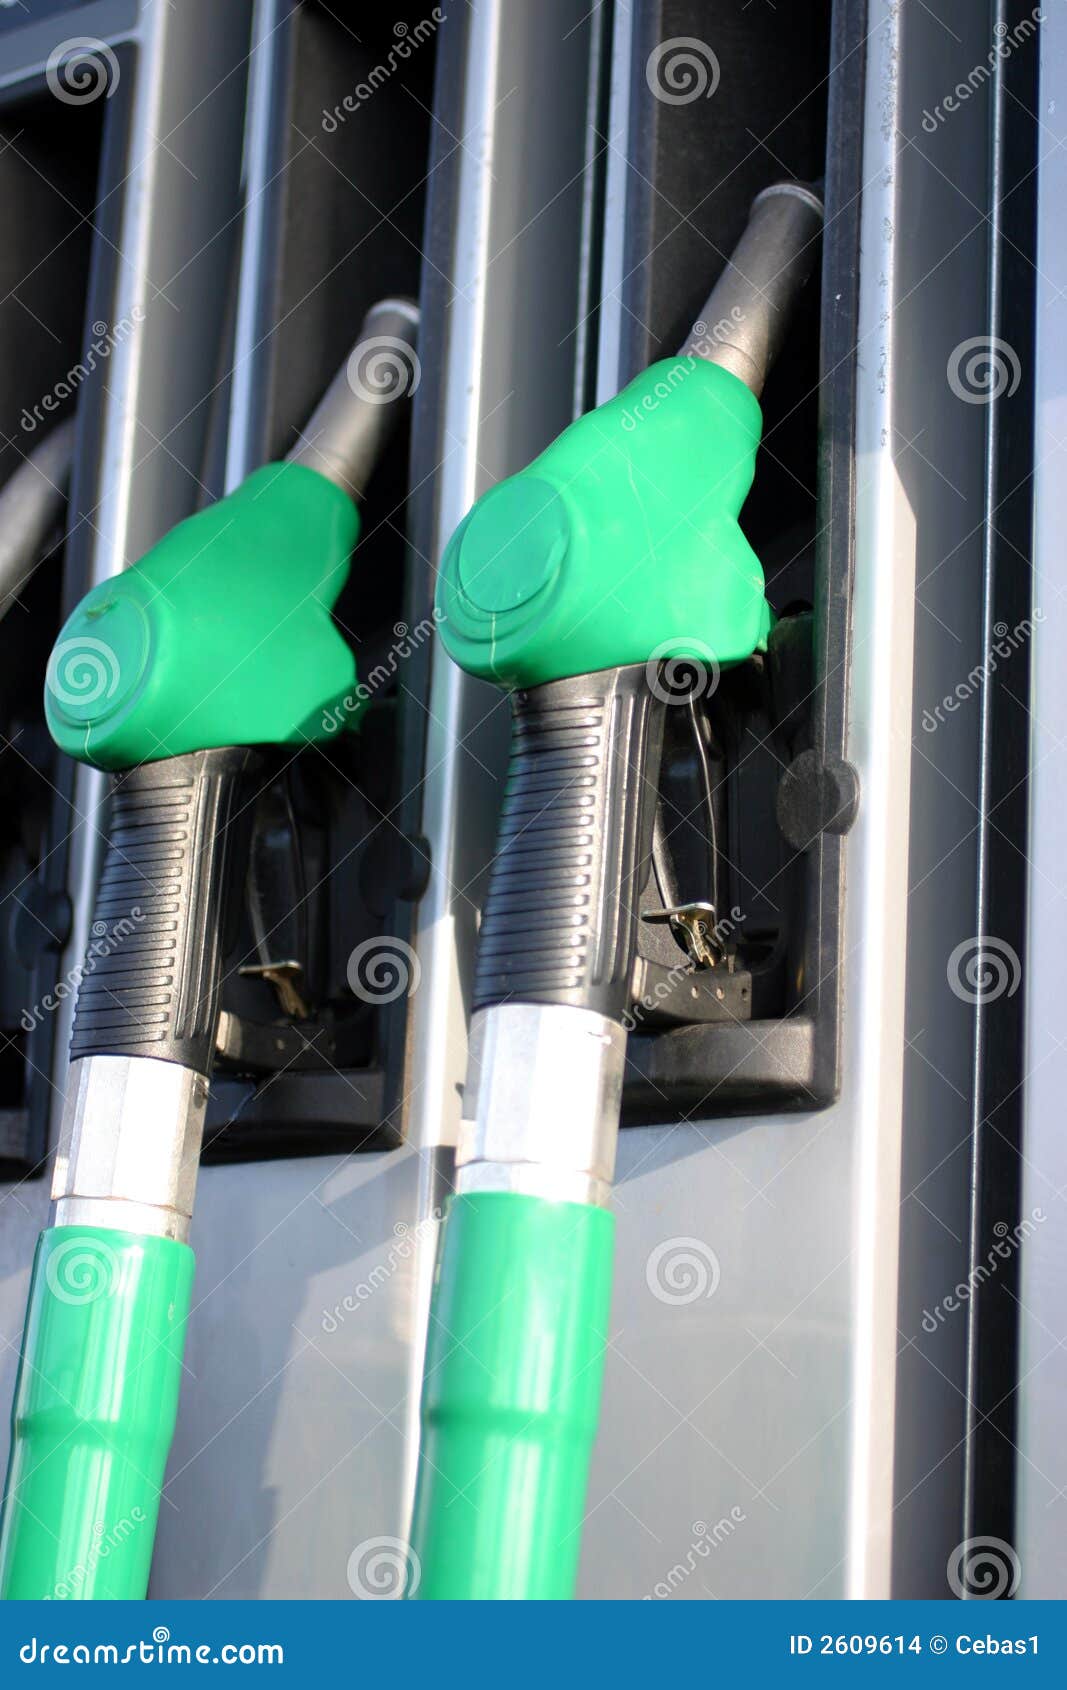 92,017 Car Fuel Pump Royalty-Free Photos and Stock Images